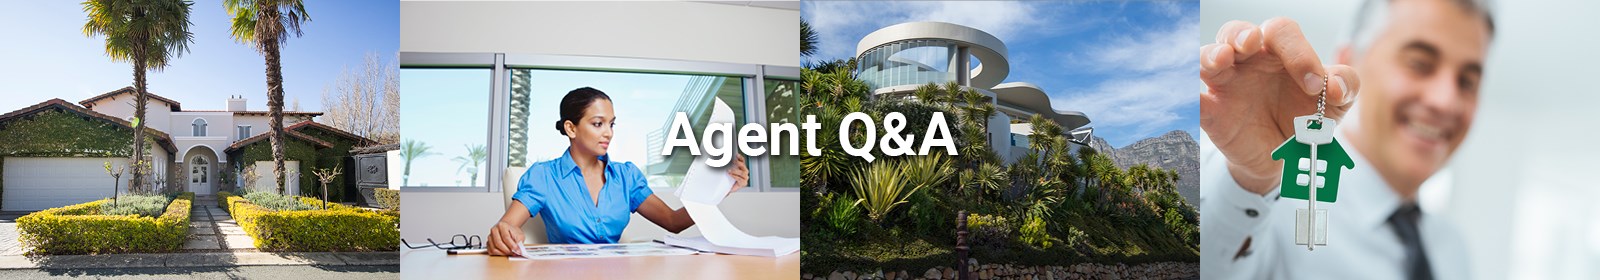 Estate agent Q&A on the Strand